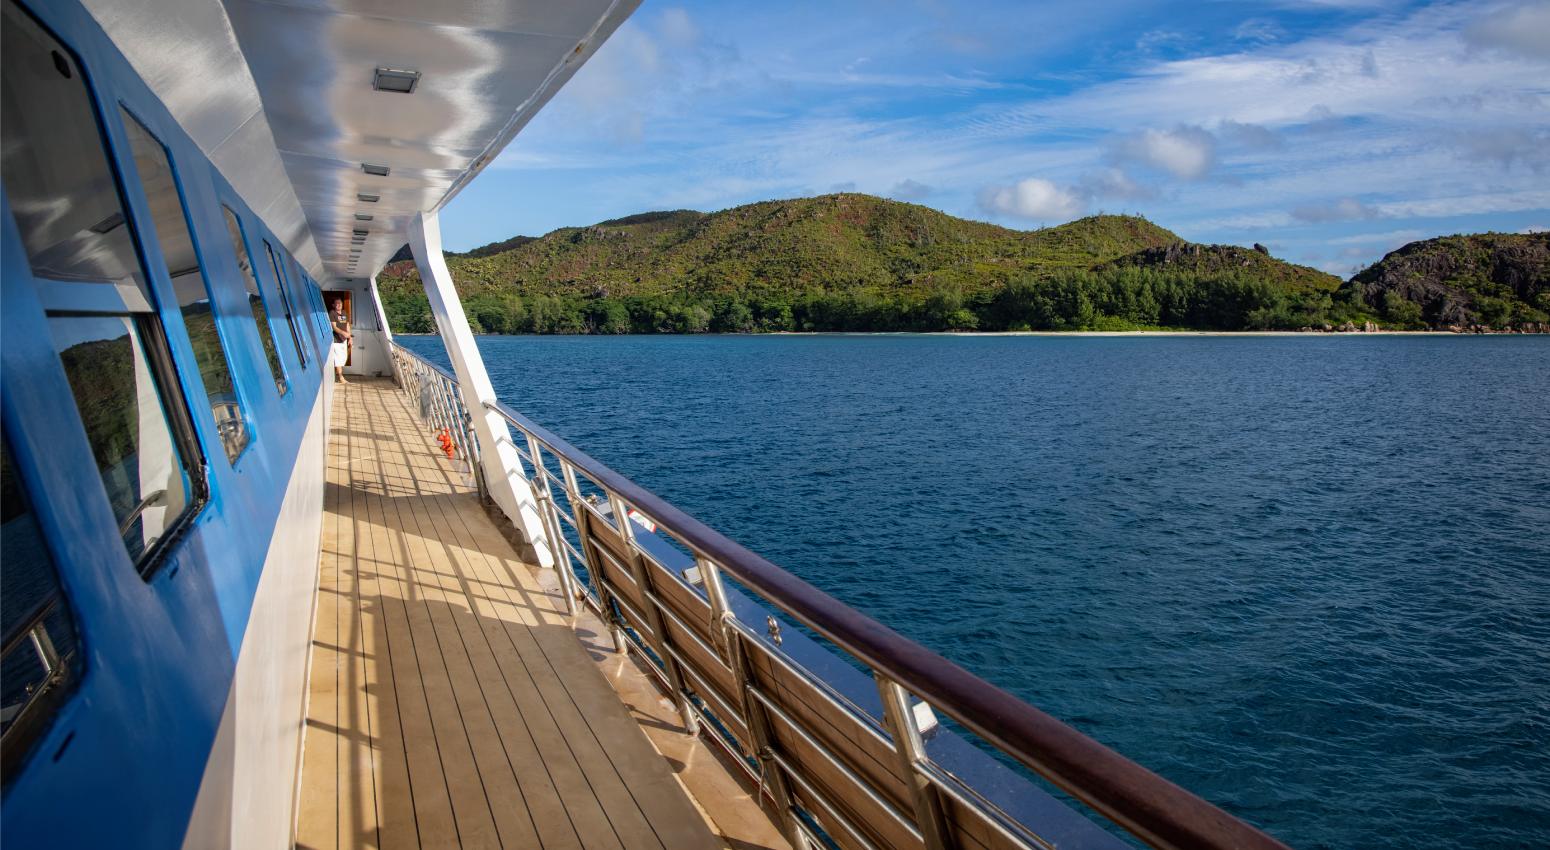 On the deck of a Variety Cruises' ship